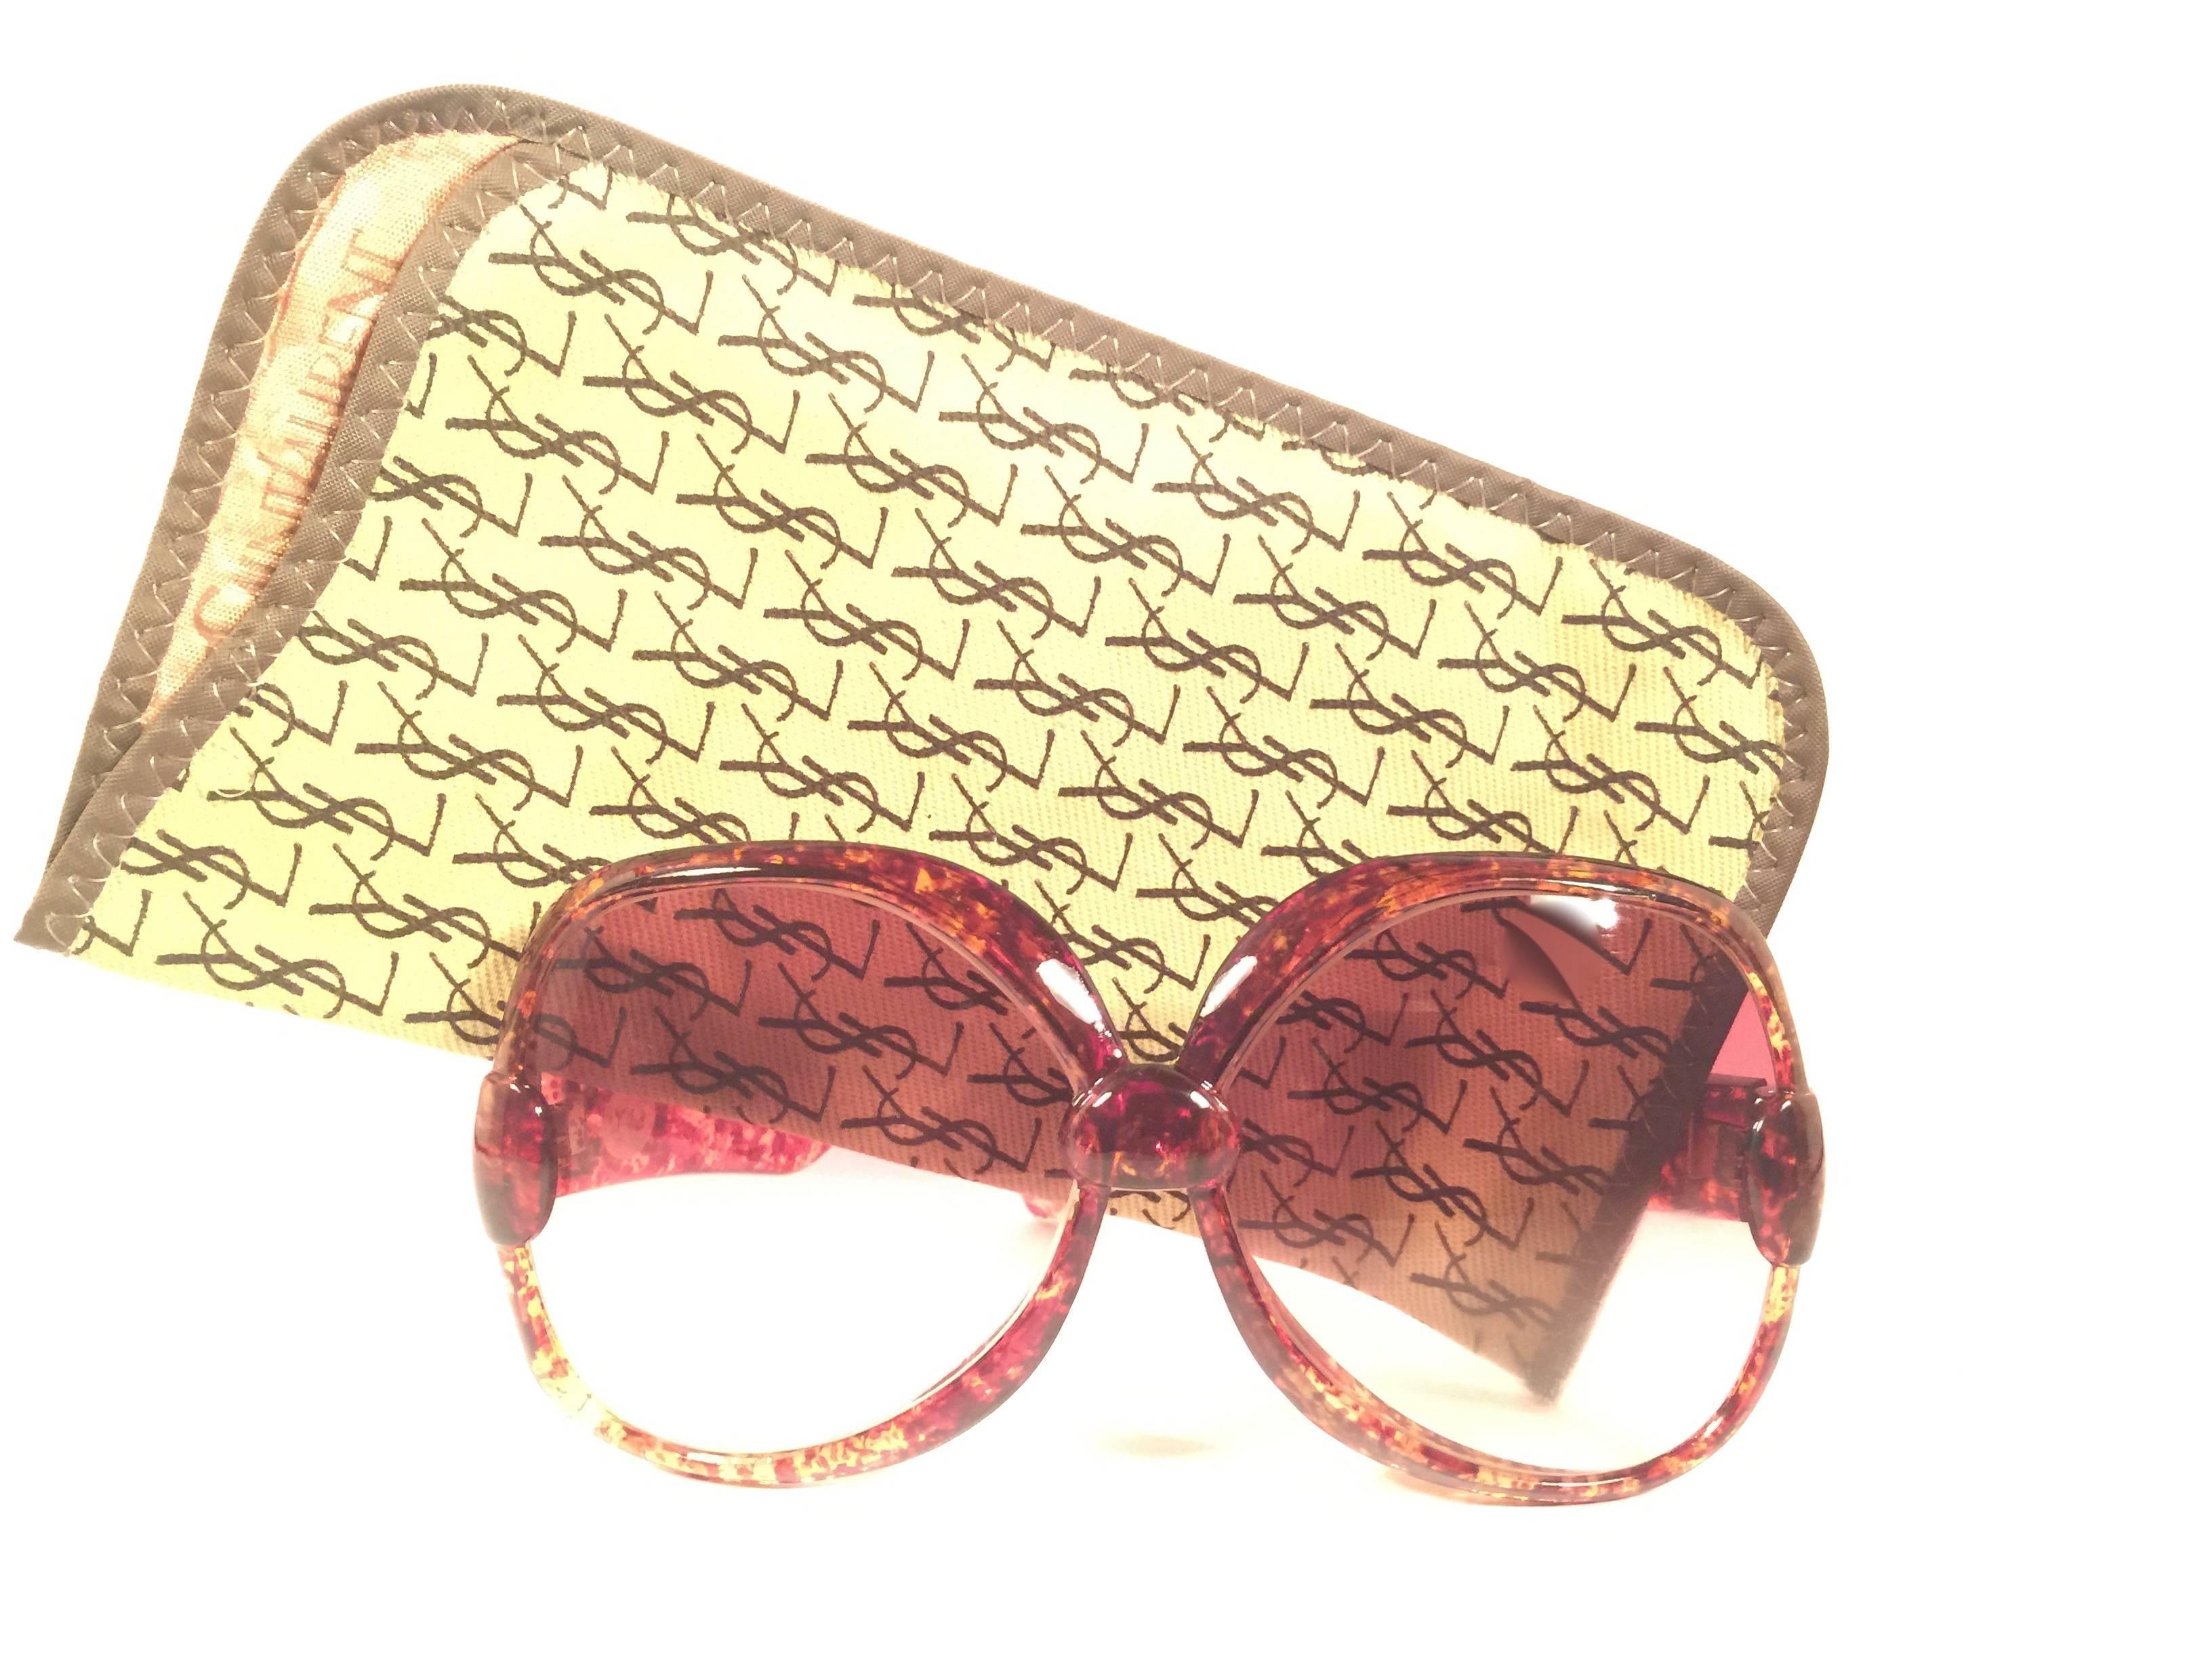 Beautiful and stylish vintage new Yves Saint Laurent 1970’s Oversized sunglasses in a translucent jasped brown frame. Spotless pair of light rose gradient lenses.

New! never worn or displayed. Flawless pair!!! 

Comes with its original YSL